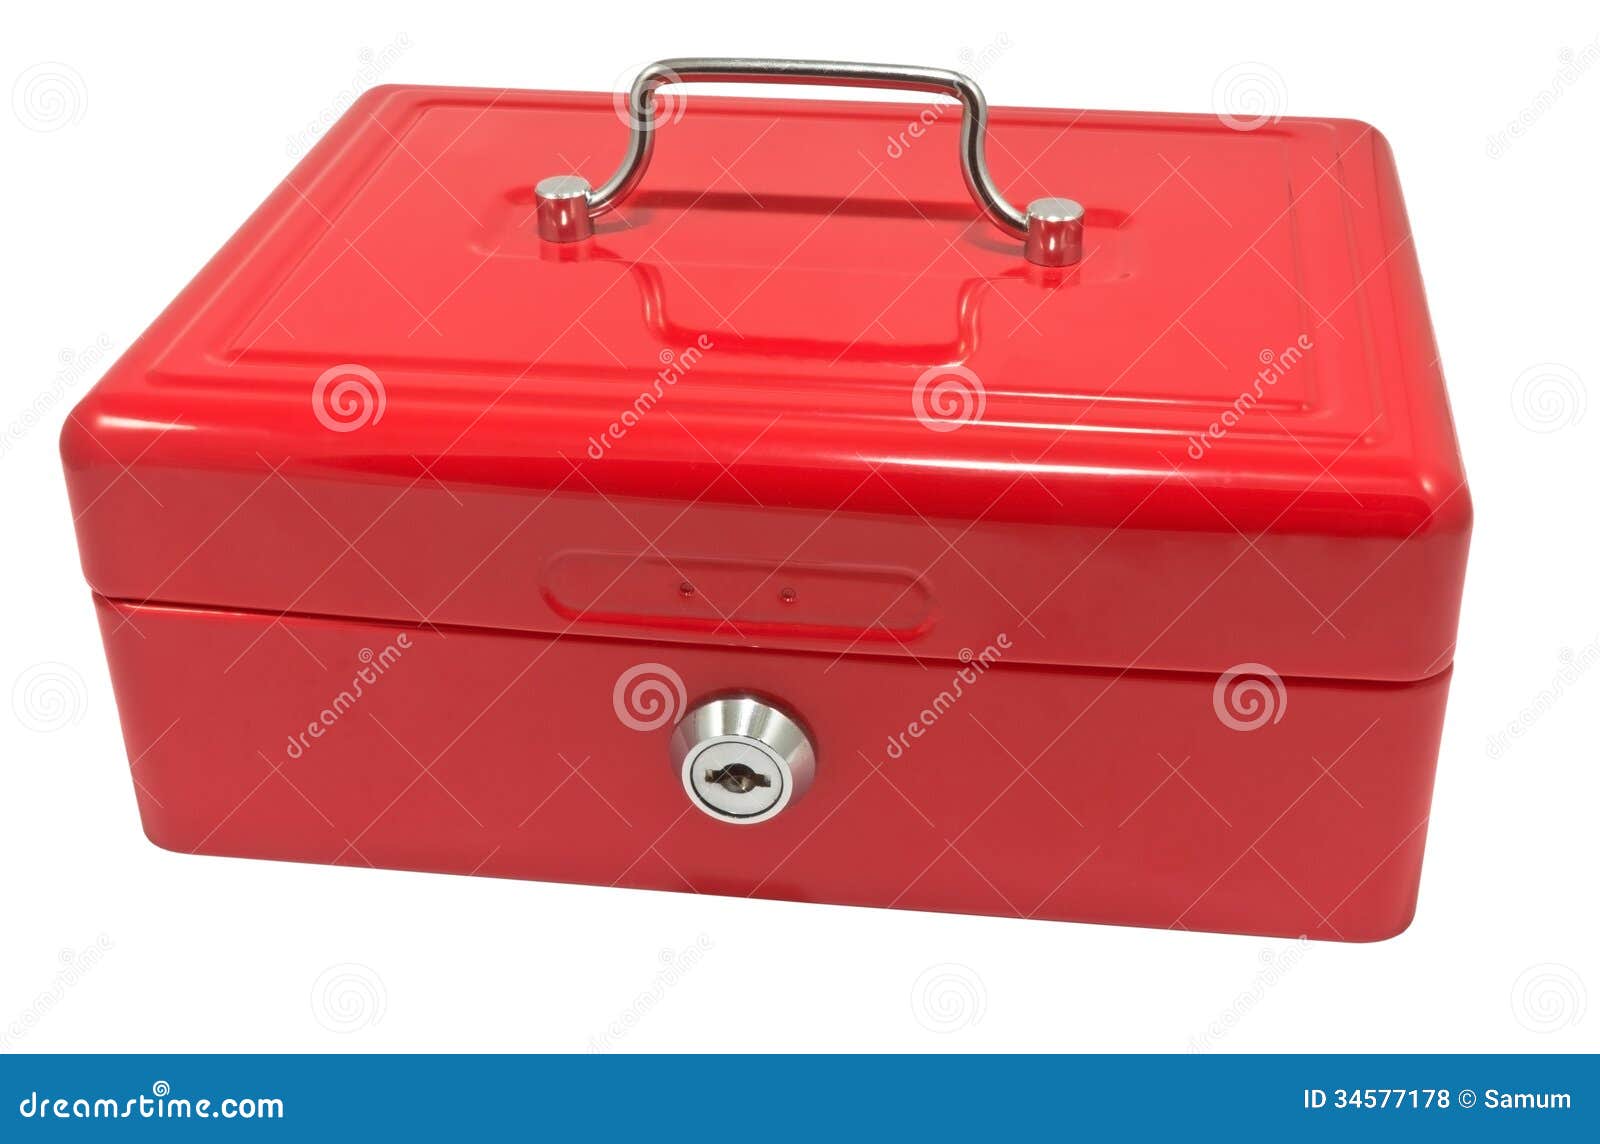 Red box stock photo. Image of secure, protective, carry - 34577178